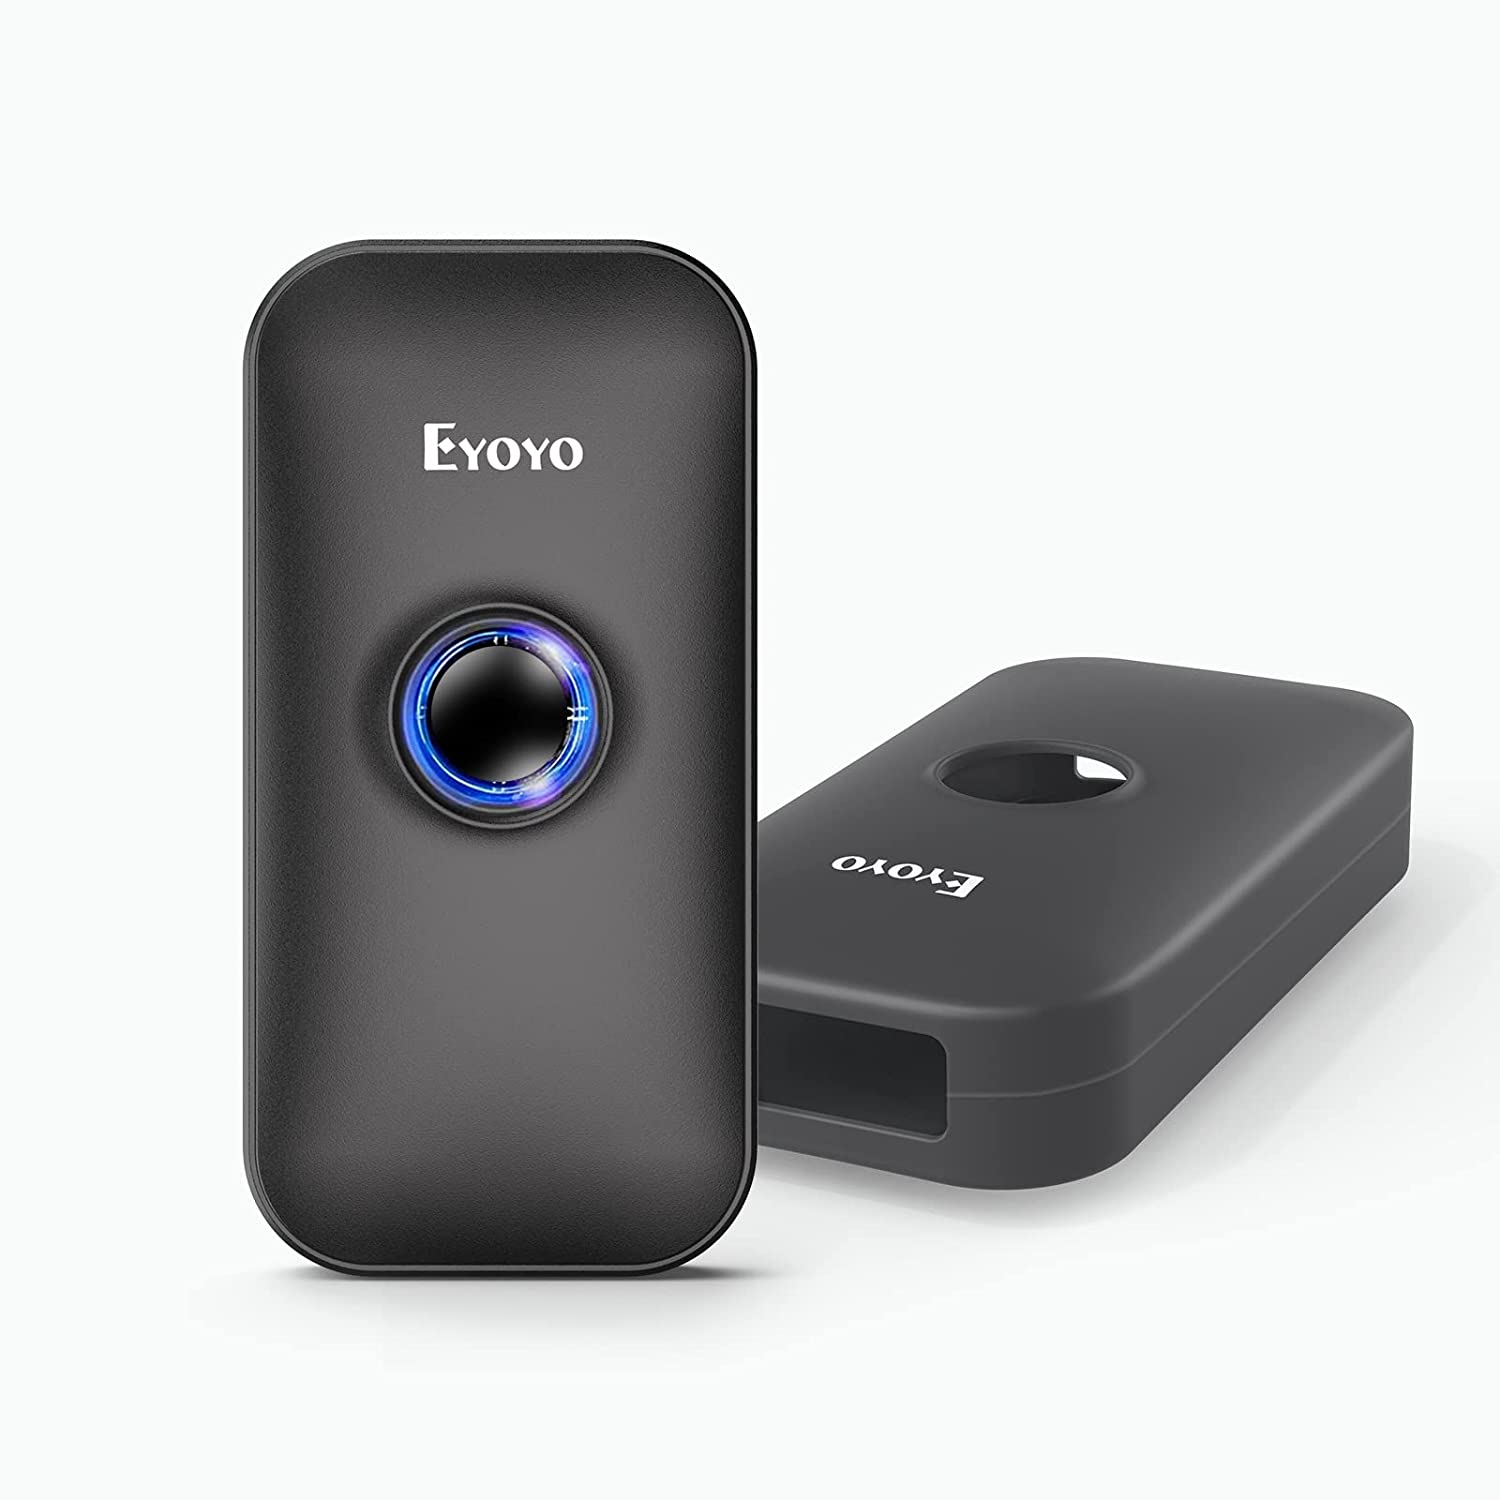 Eyoyo Mini 1D Bluetooth Barcode Scanner with Case, 3-in-1 Bluetooth & USB Wired & 2.4G Wireless Barcode Reader Portable Bar Code Scanning Work with Windows, Android, iOS, Tablets or Computers(Black)